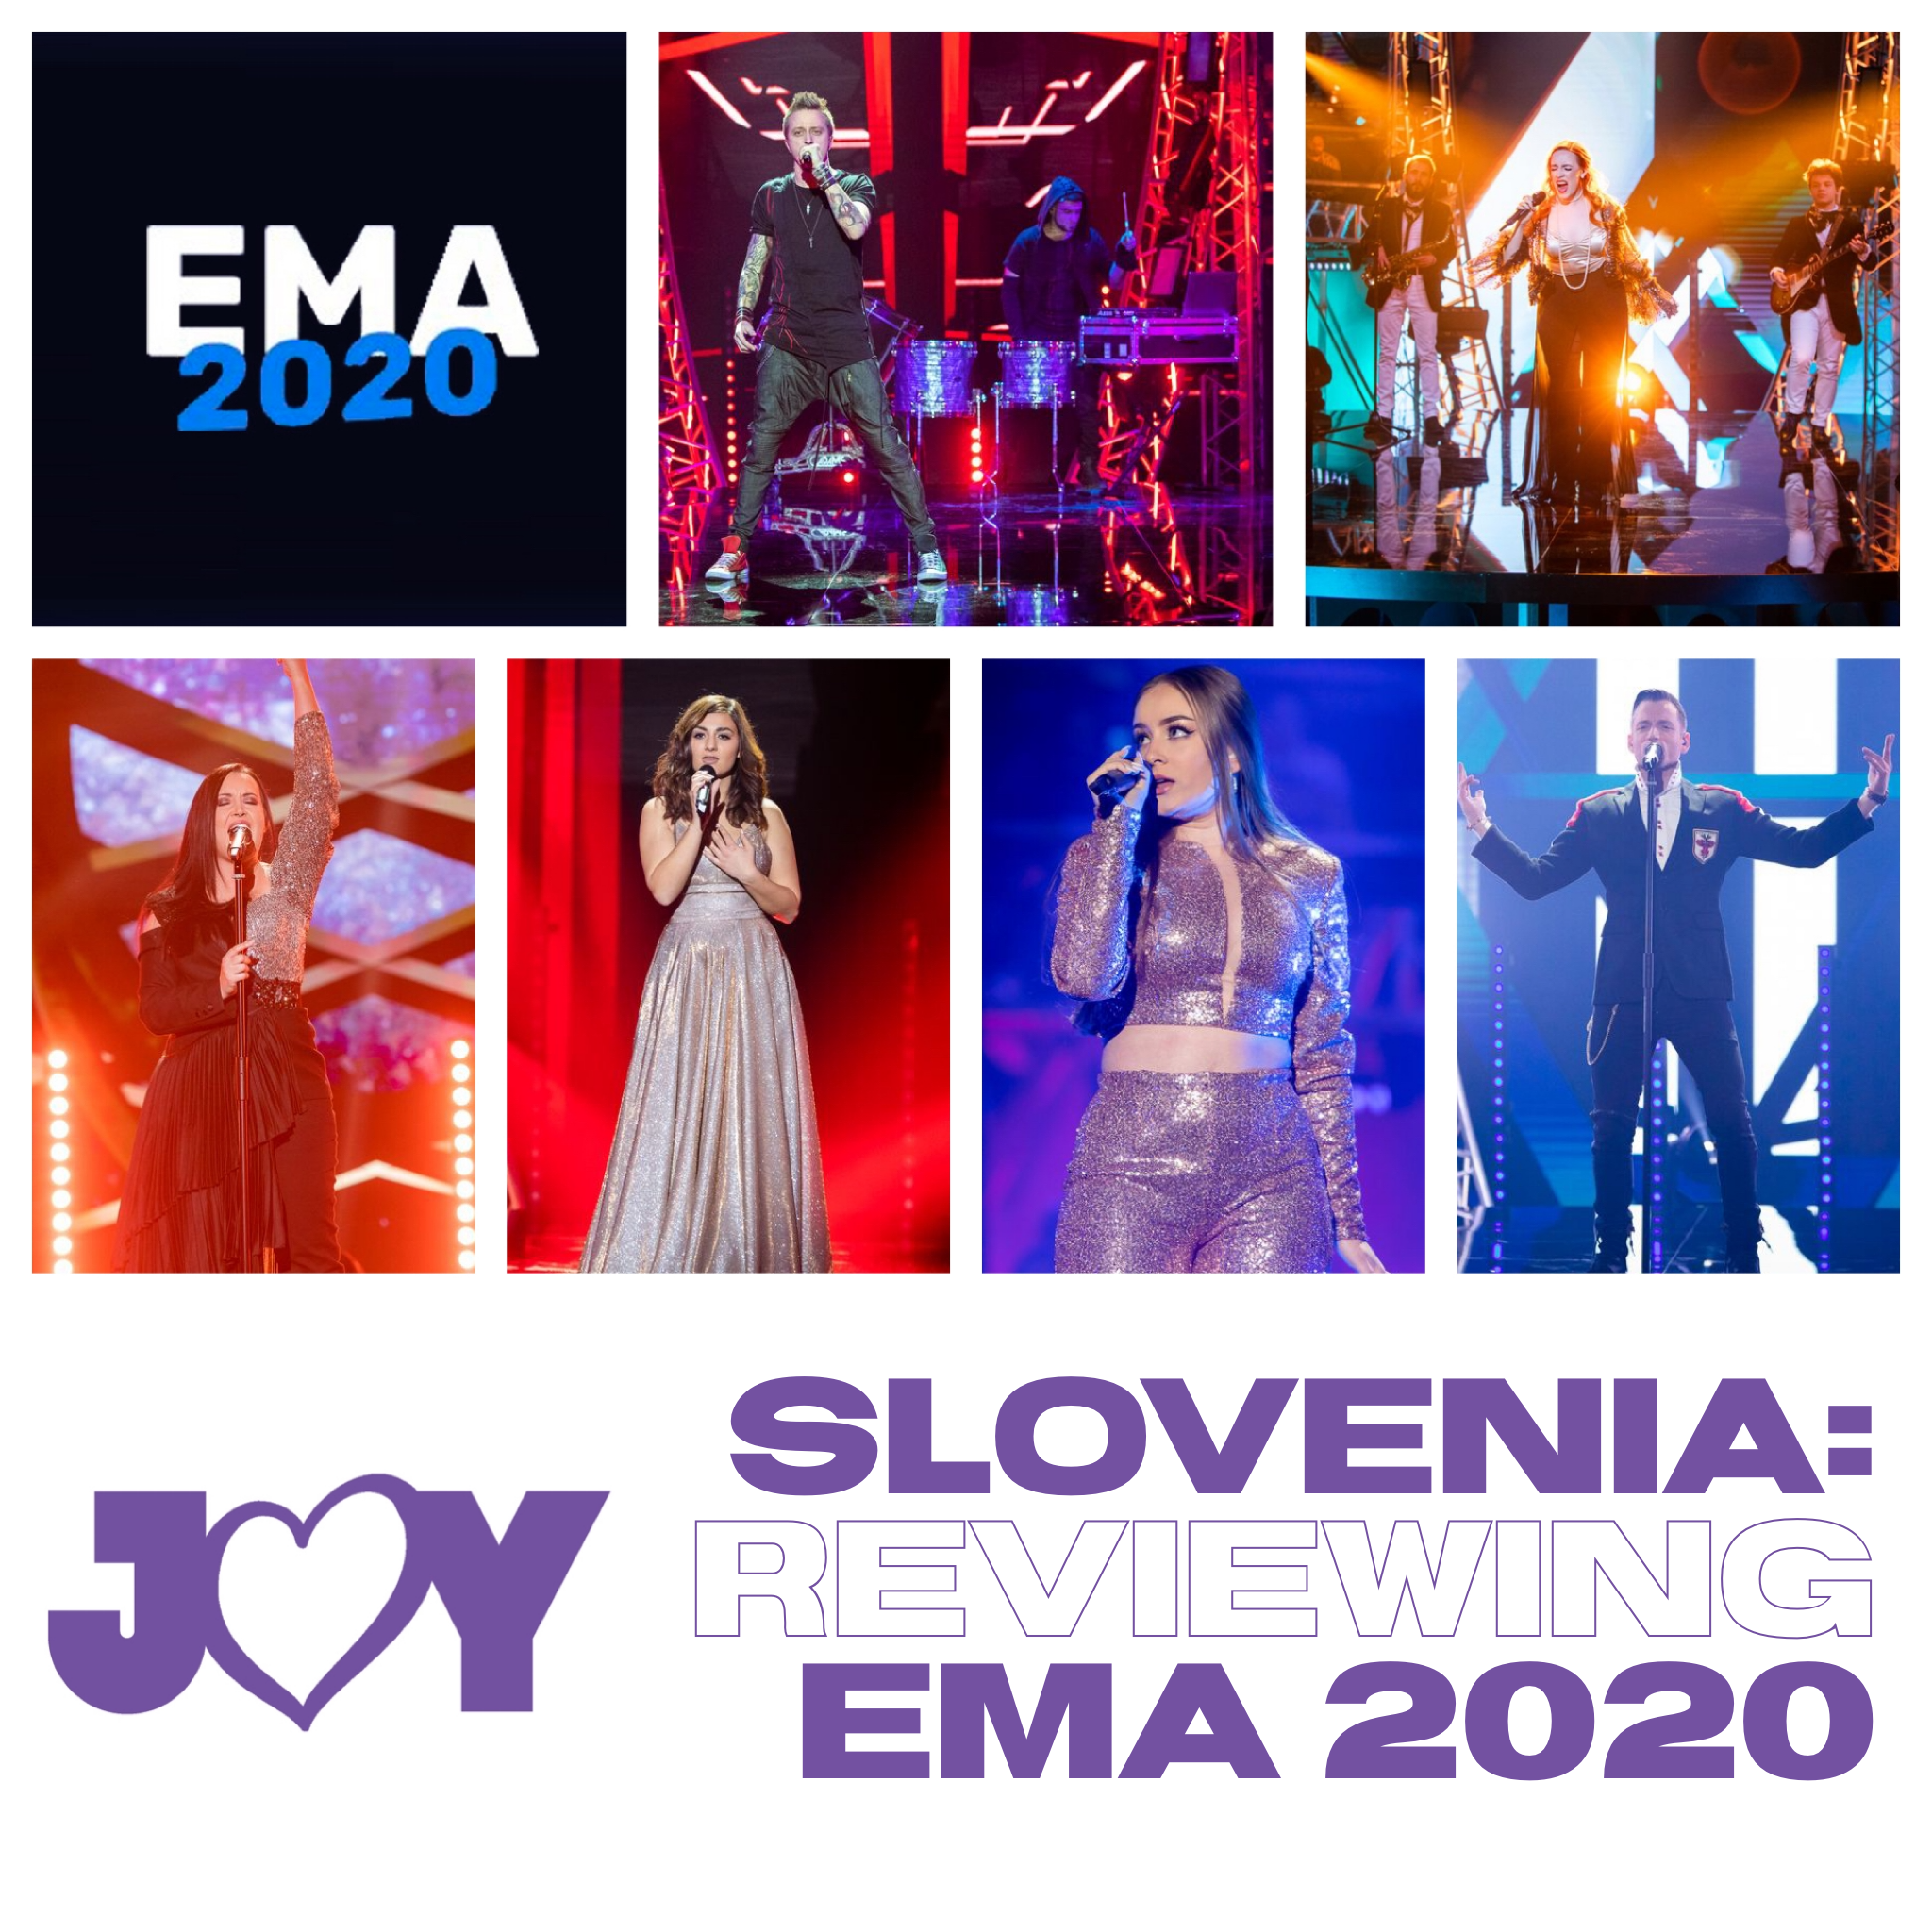 Maybe it’s in the Slovenian water: Reviewing EMA 2020